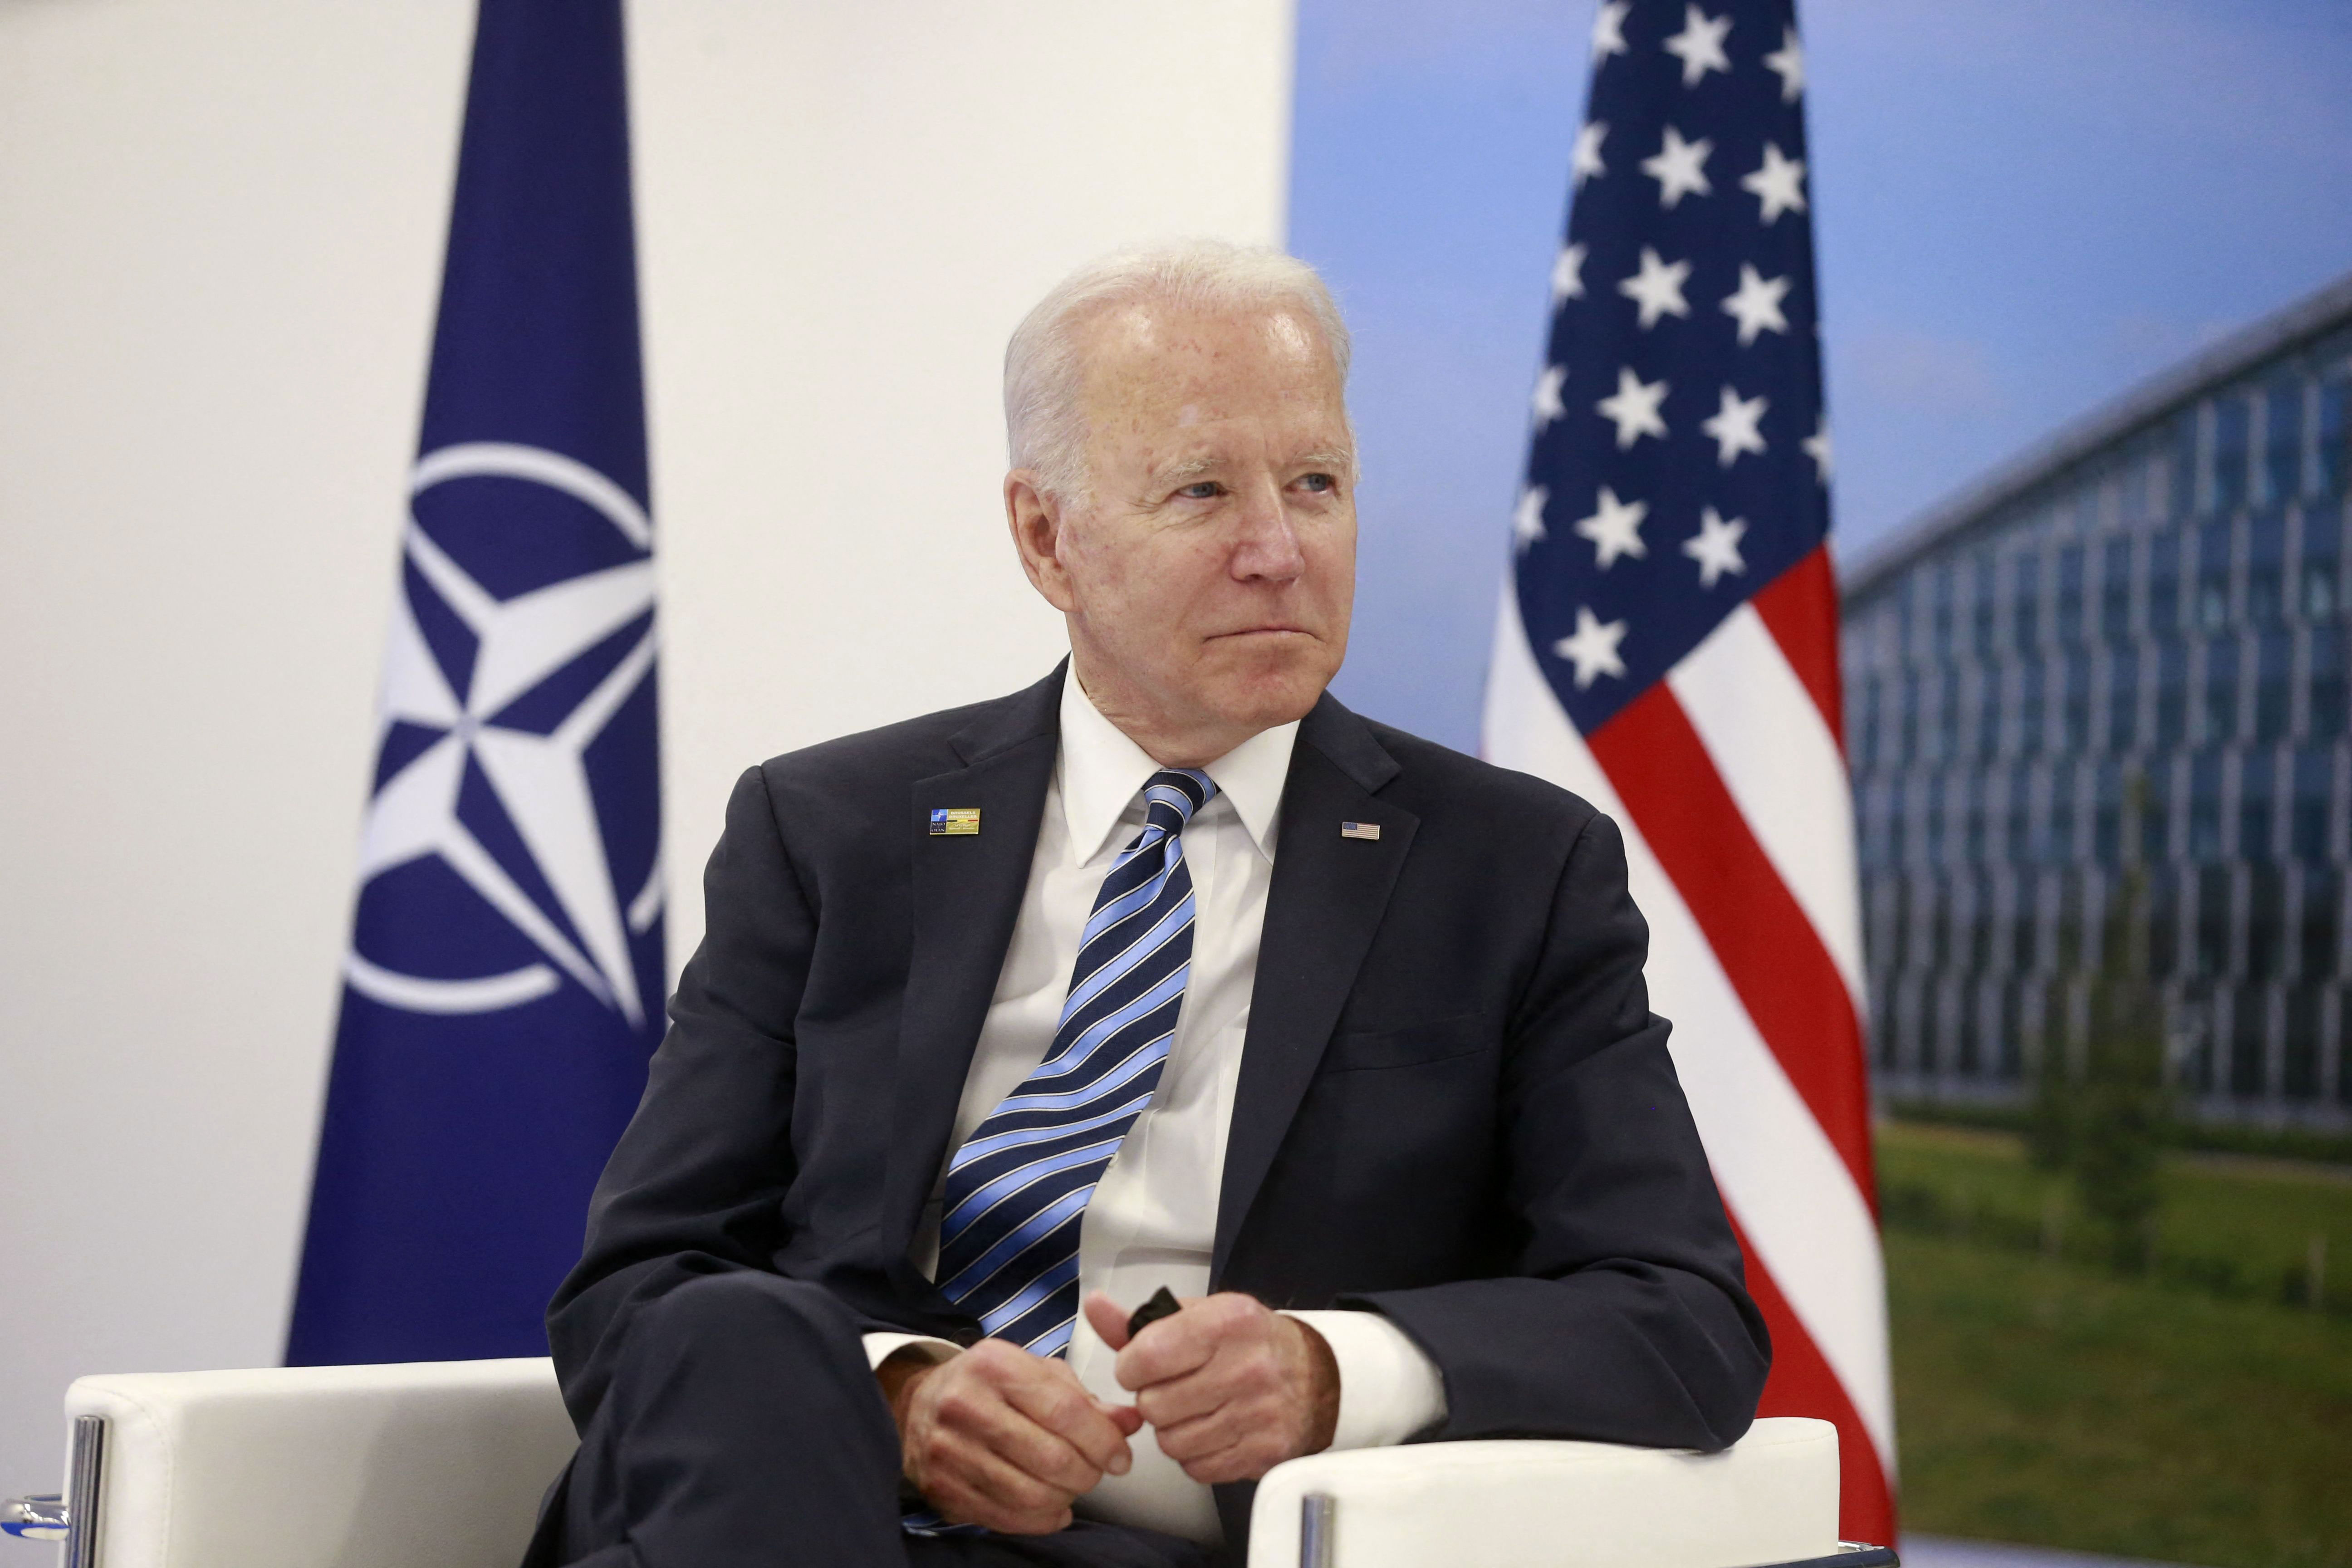 US President Joe Biden meets with NATO Secretary General Jens Stoltenberg, not pictured, at the NATO summit in Brussels, Belgium, on June 14.